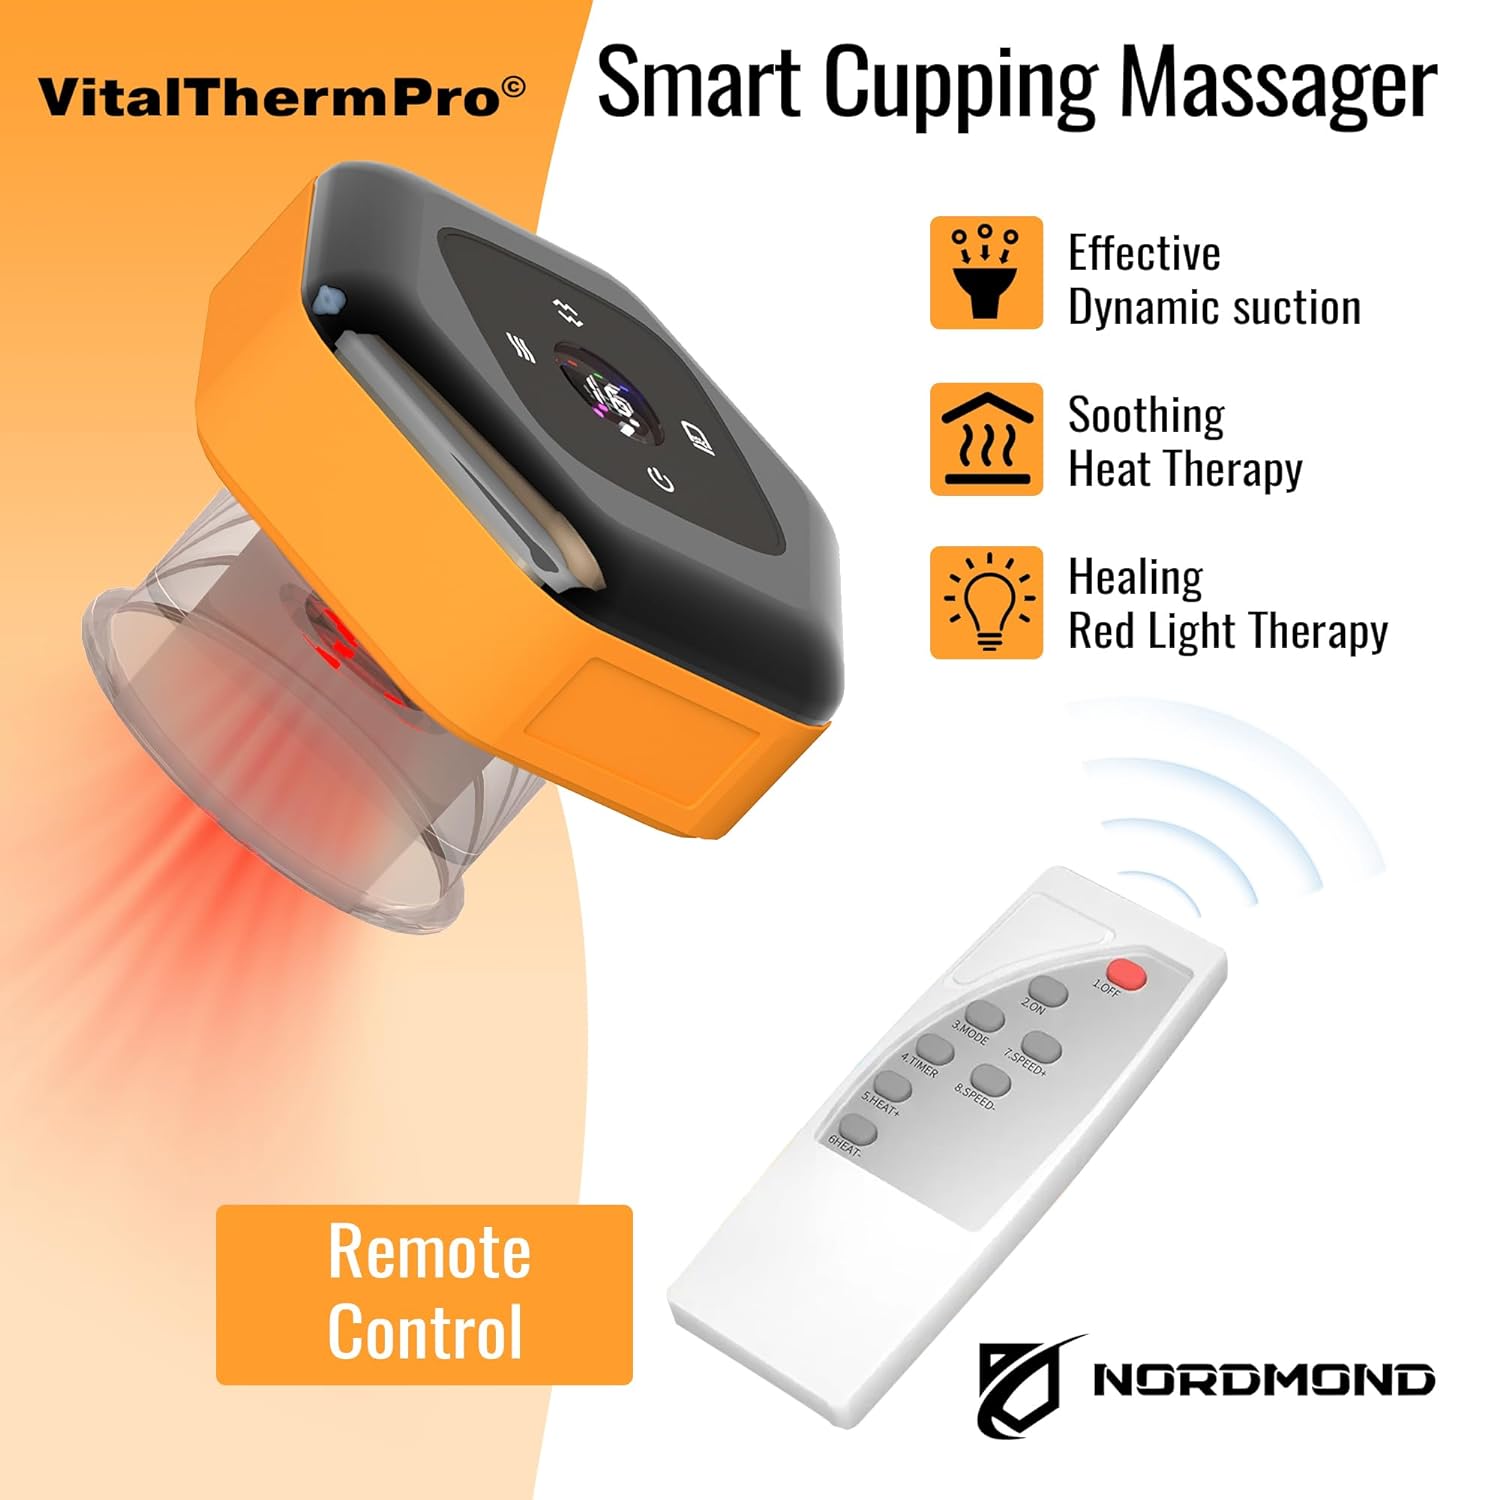 Smart Cupping Massager with Remote and Advanced Heat Therapy - Electric Cupping Therapy Set for Relaxation, Knots, Pain and Tension Relief - Cellulite Massager - 16 Gears for Customized Comfort